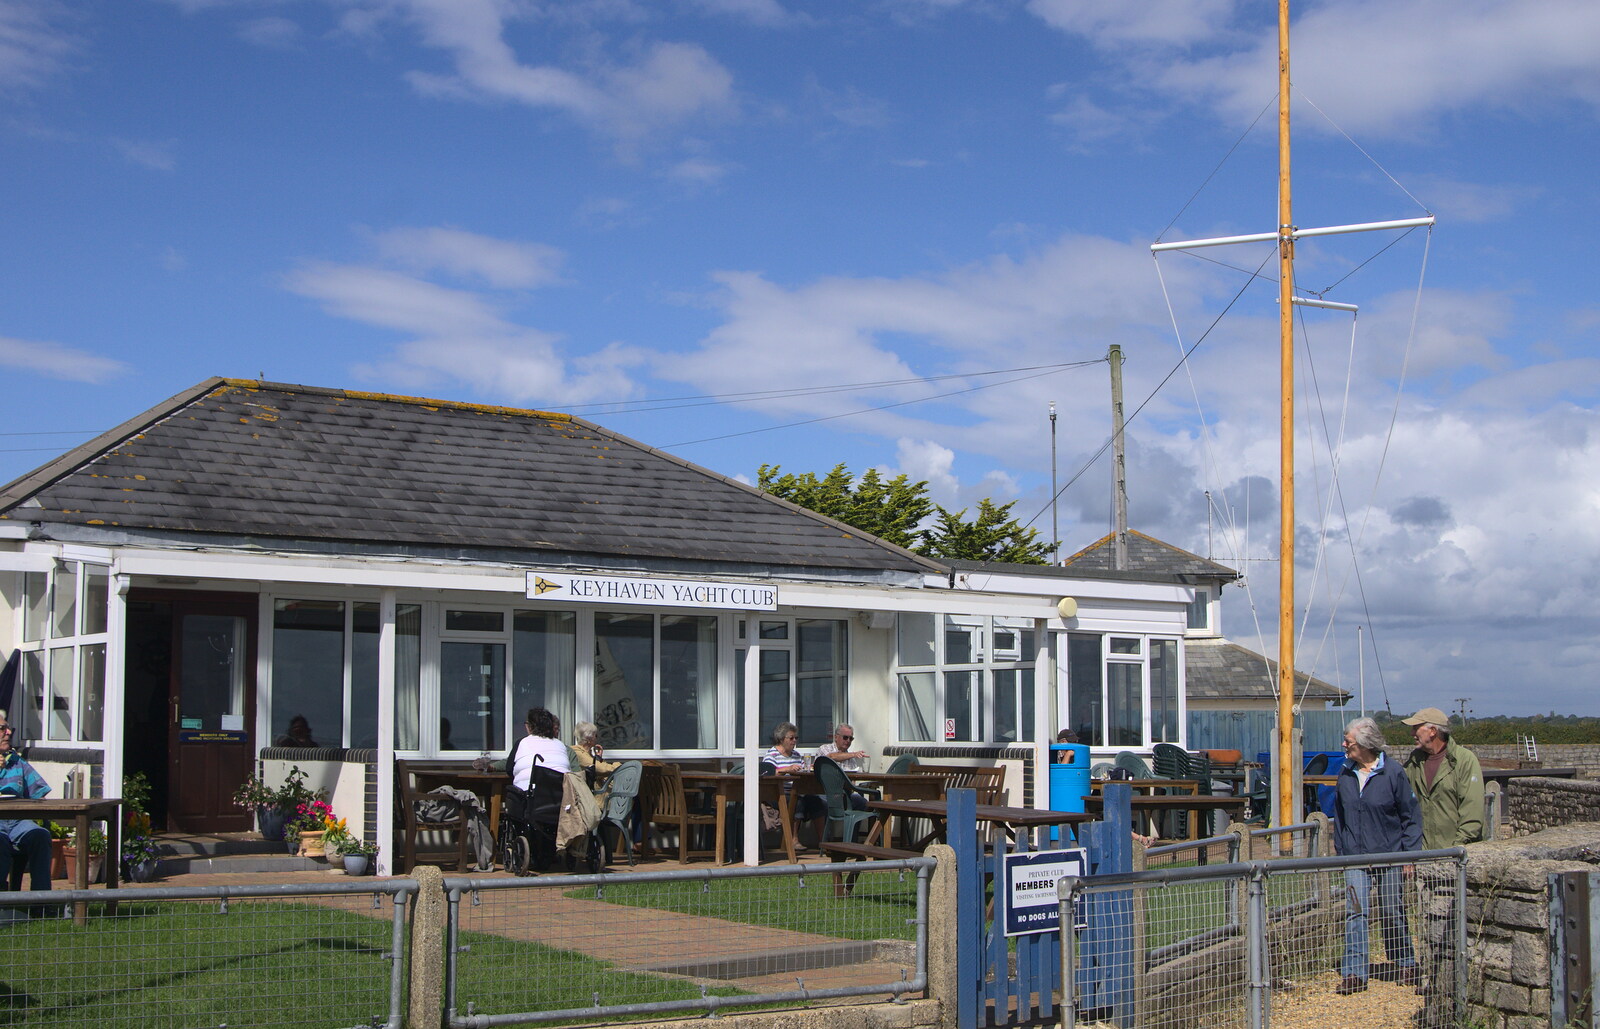 The Keyhaven Yacht Club from A Trip to Hurst Castle, Keyhaven, Hampshire - 28th August 2015